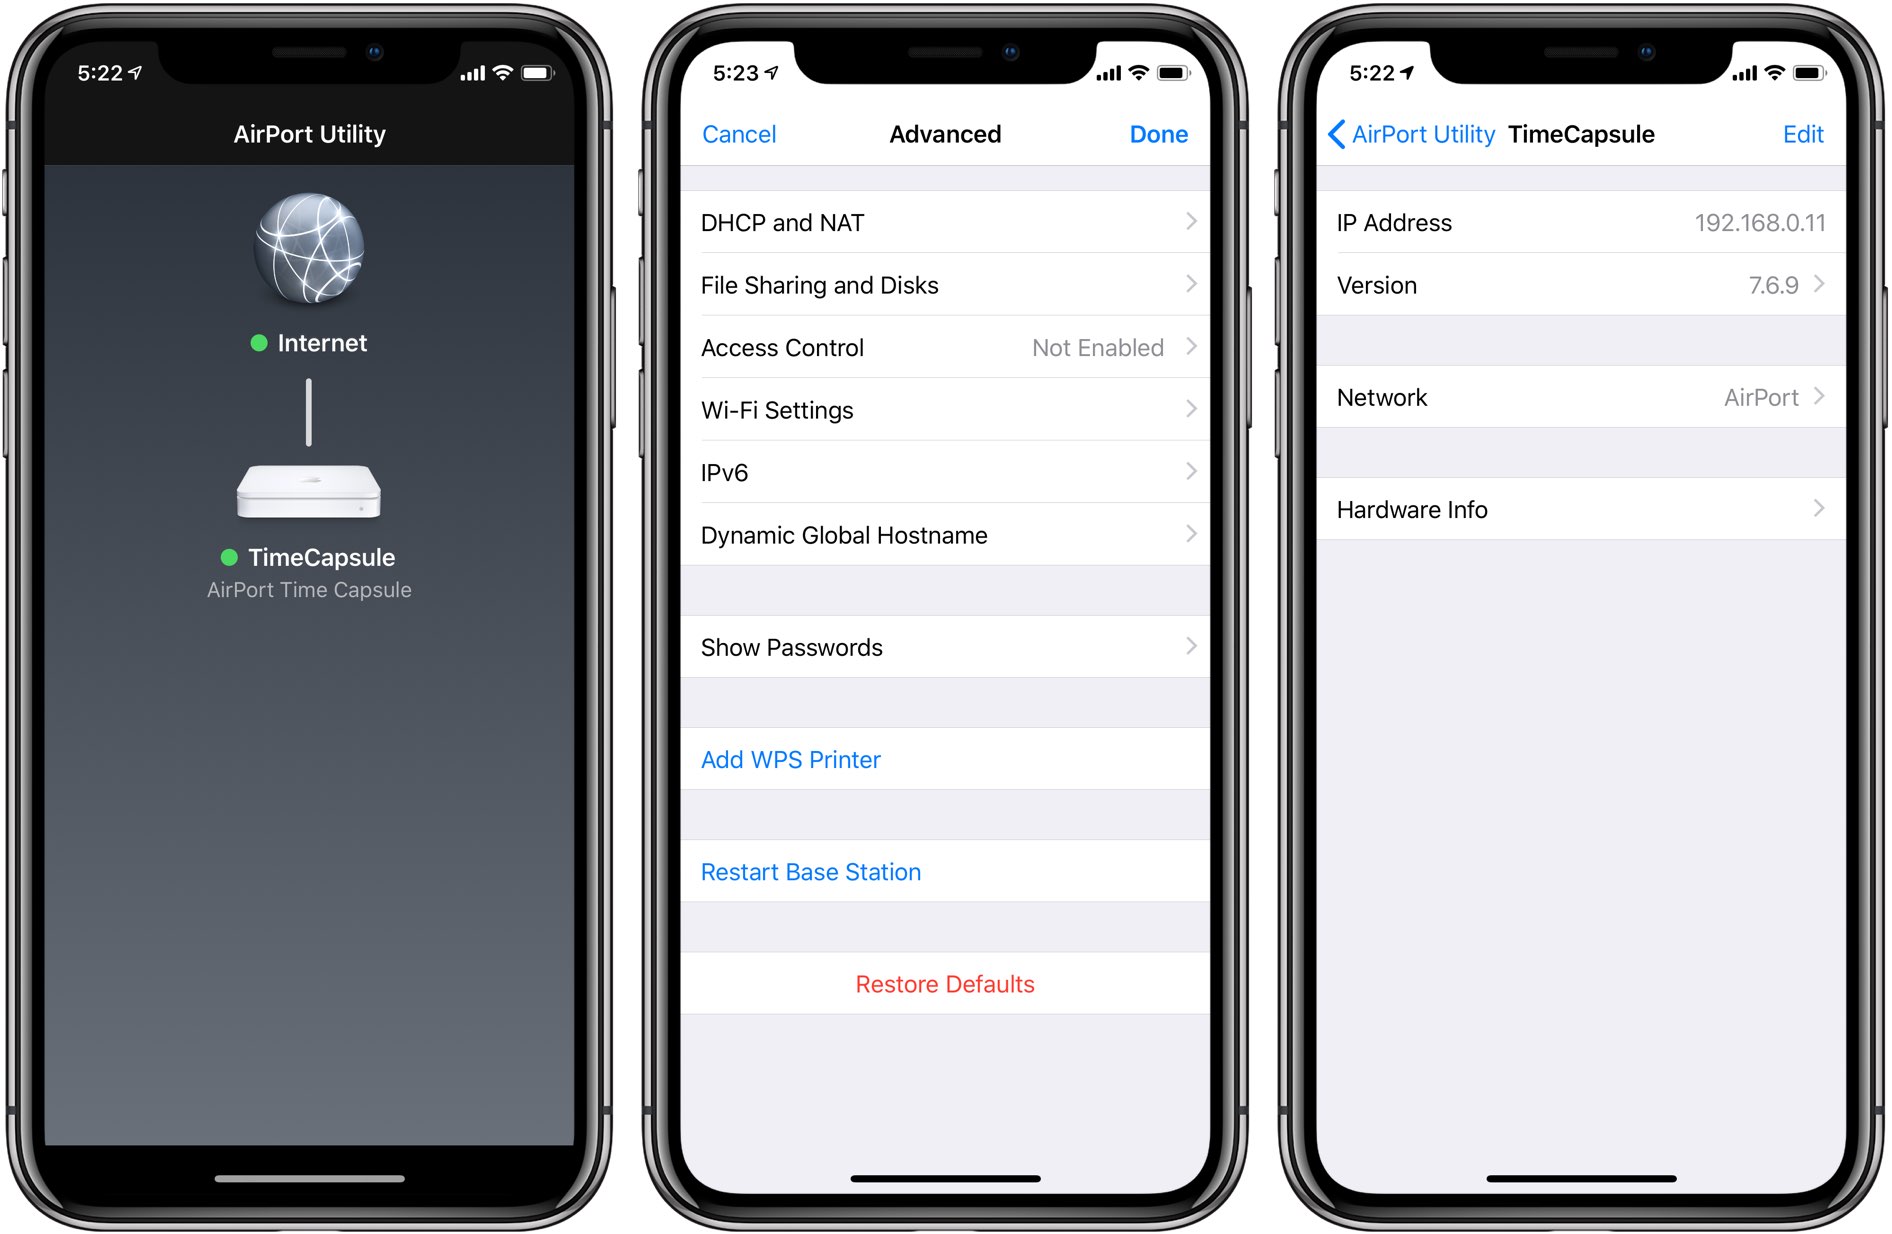 AirPort Utility for iOS running on an iPhone X